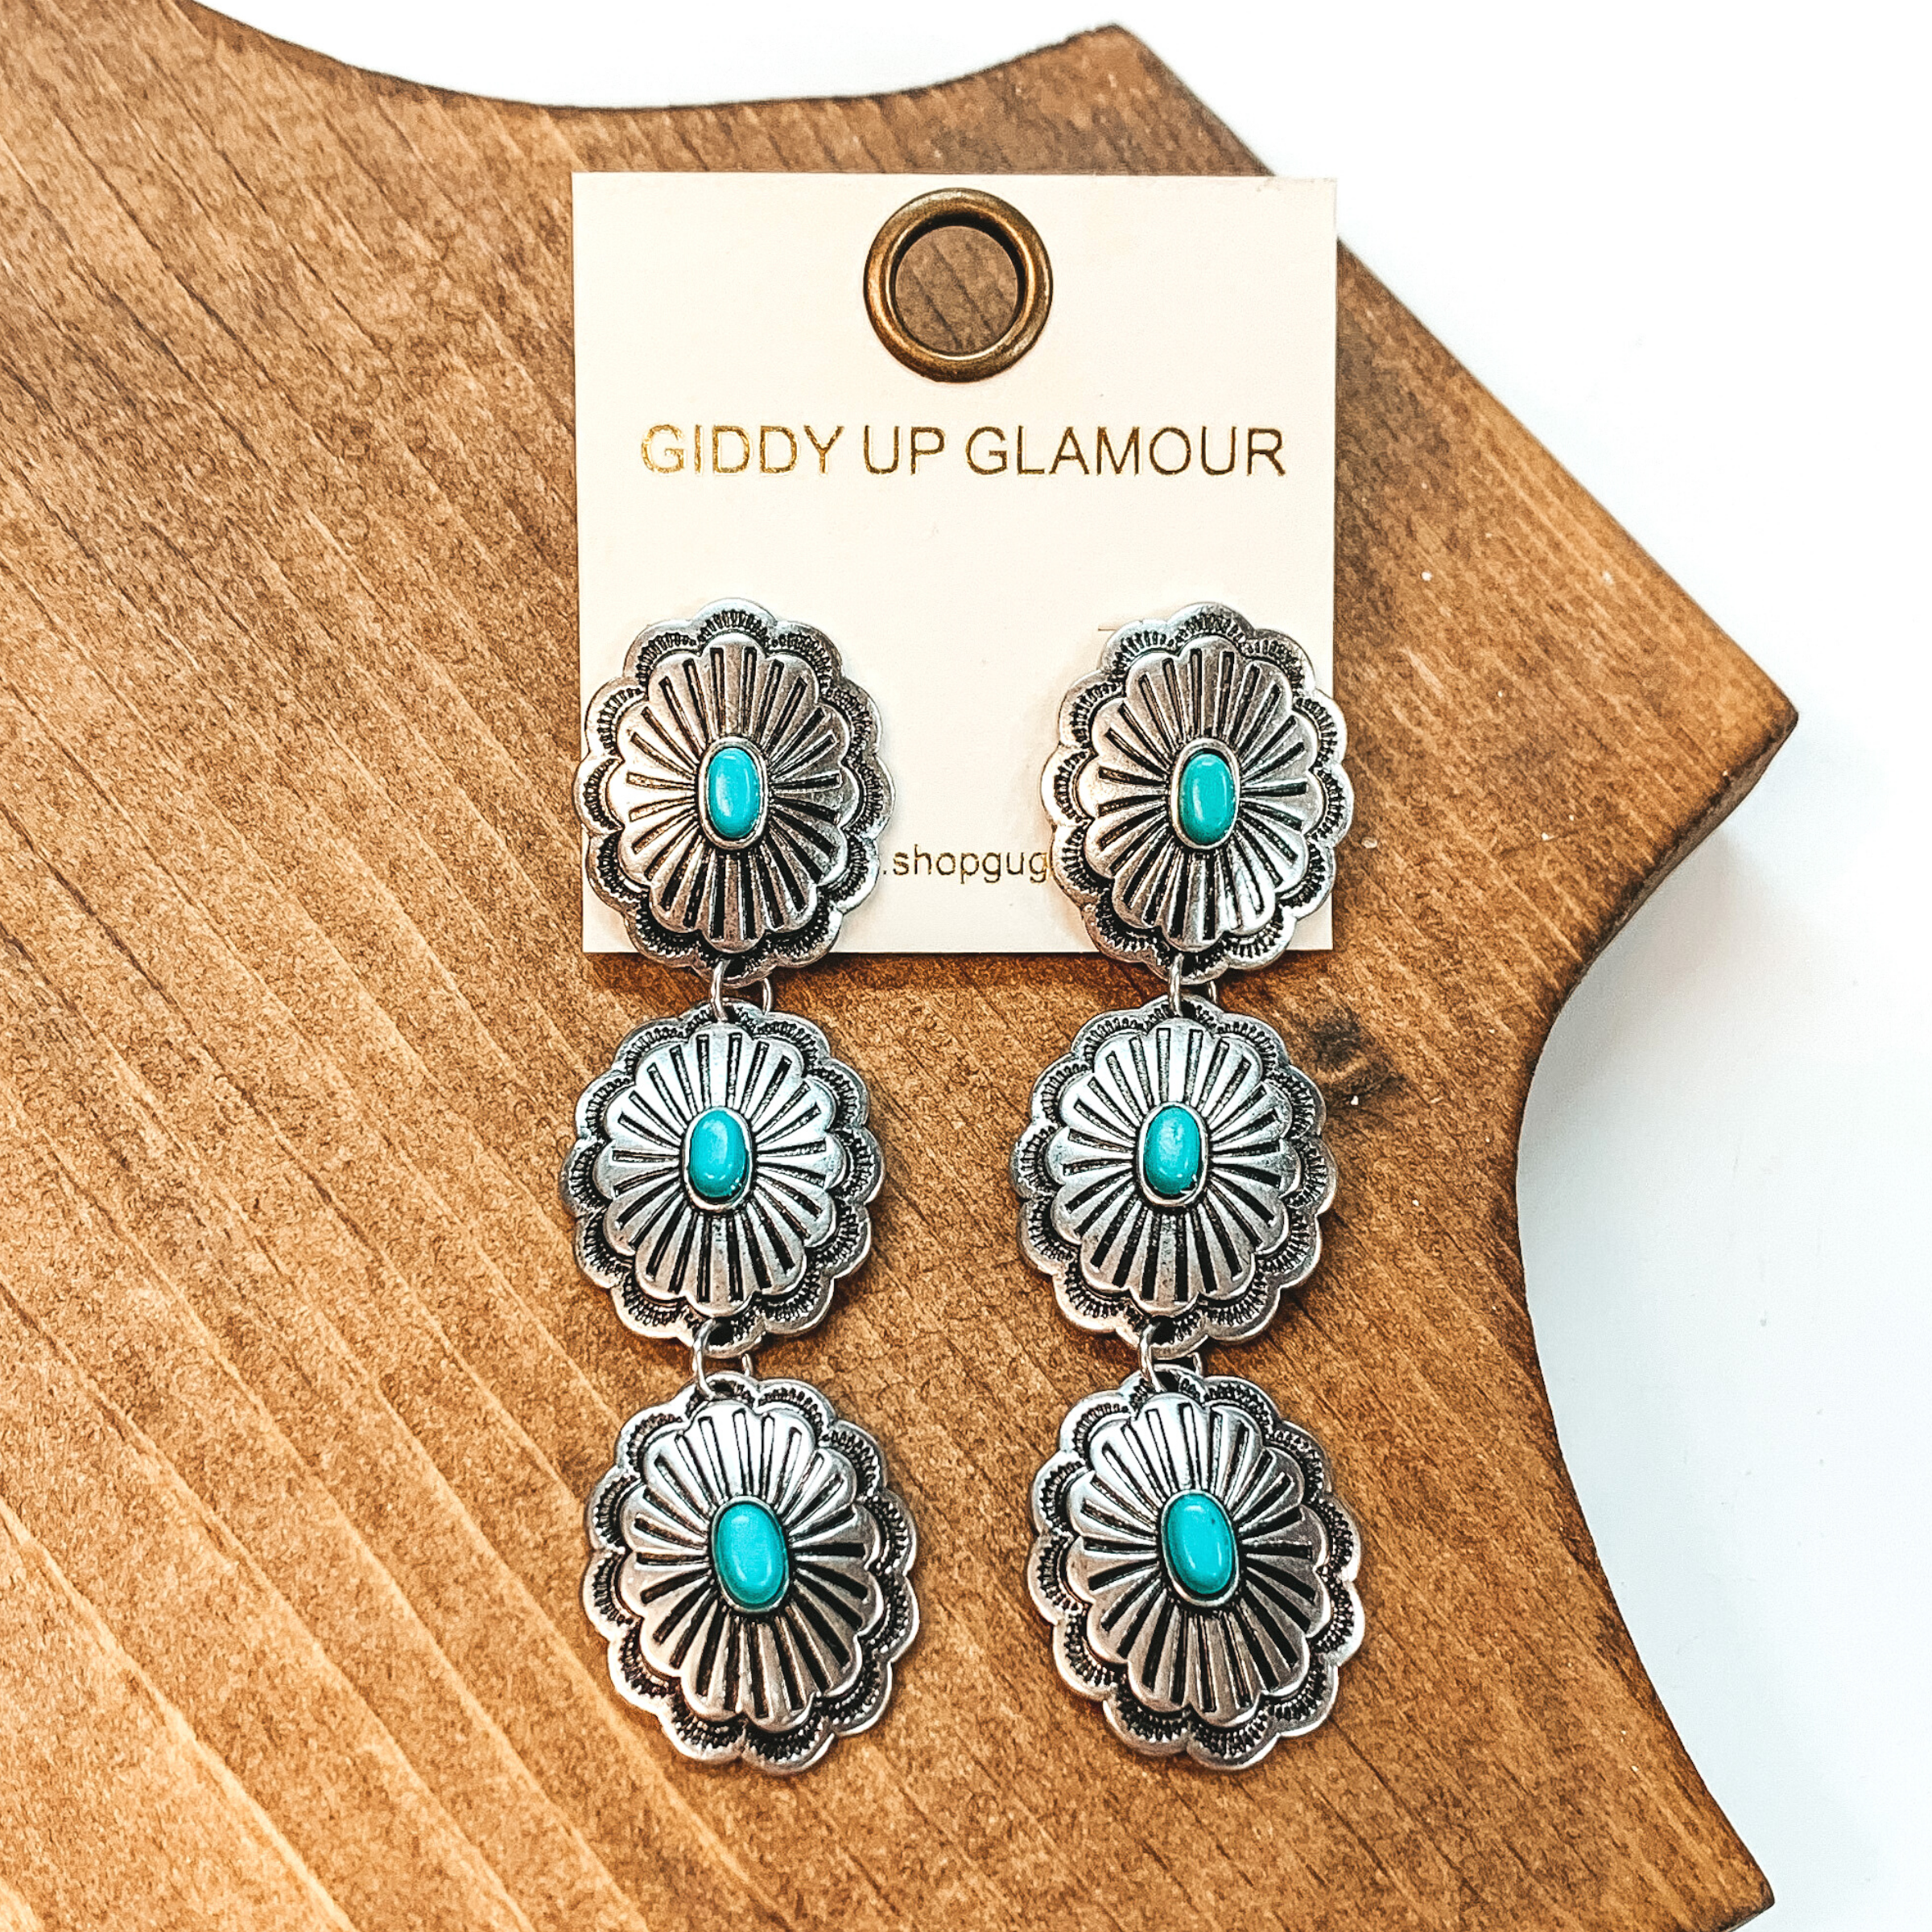 Silver, oval concho dangle earrings with a western design. At the center of all three conchos is a center, oval turquoise stone. These earrings are pictured on a white background in front of a brown block. 